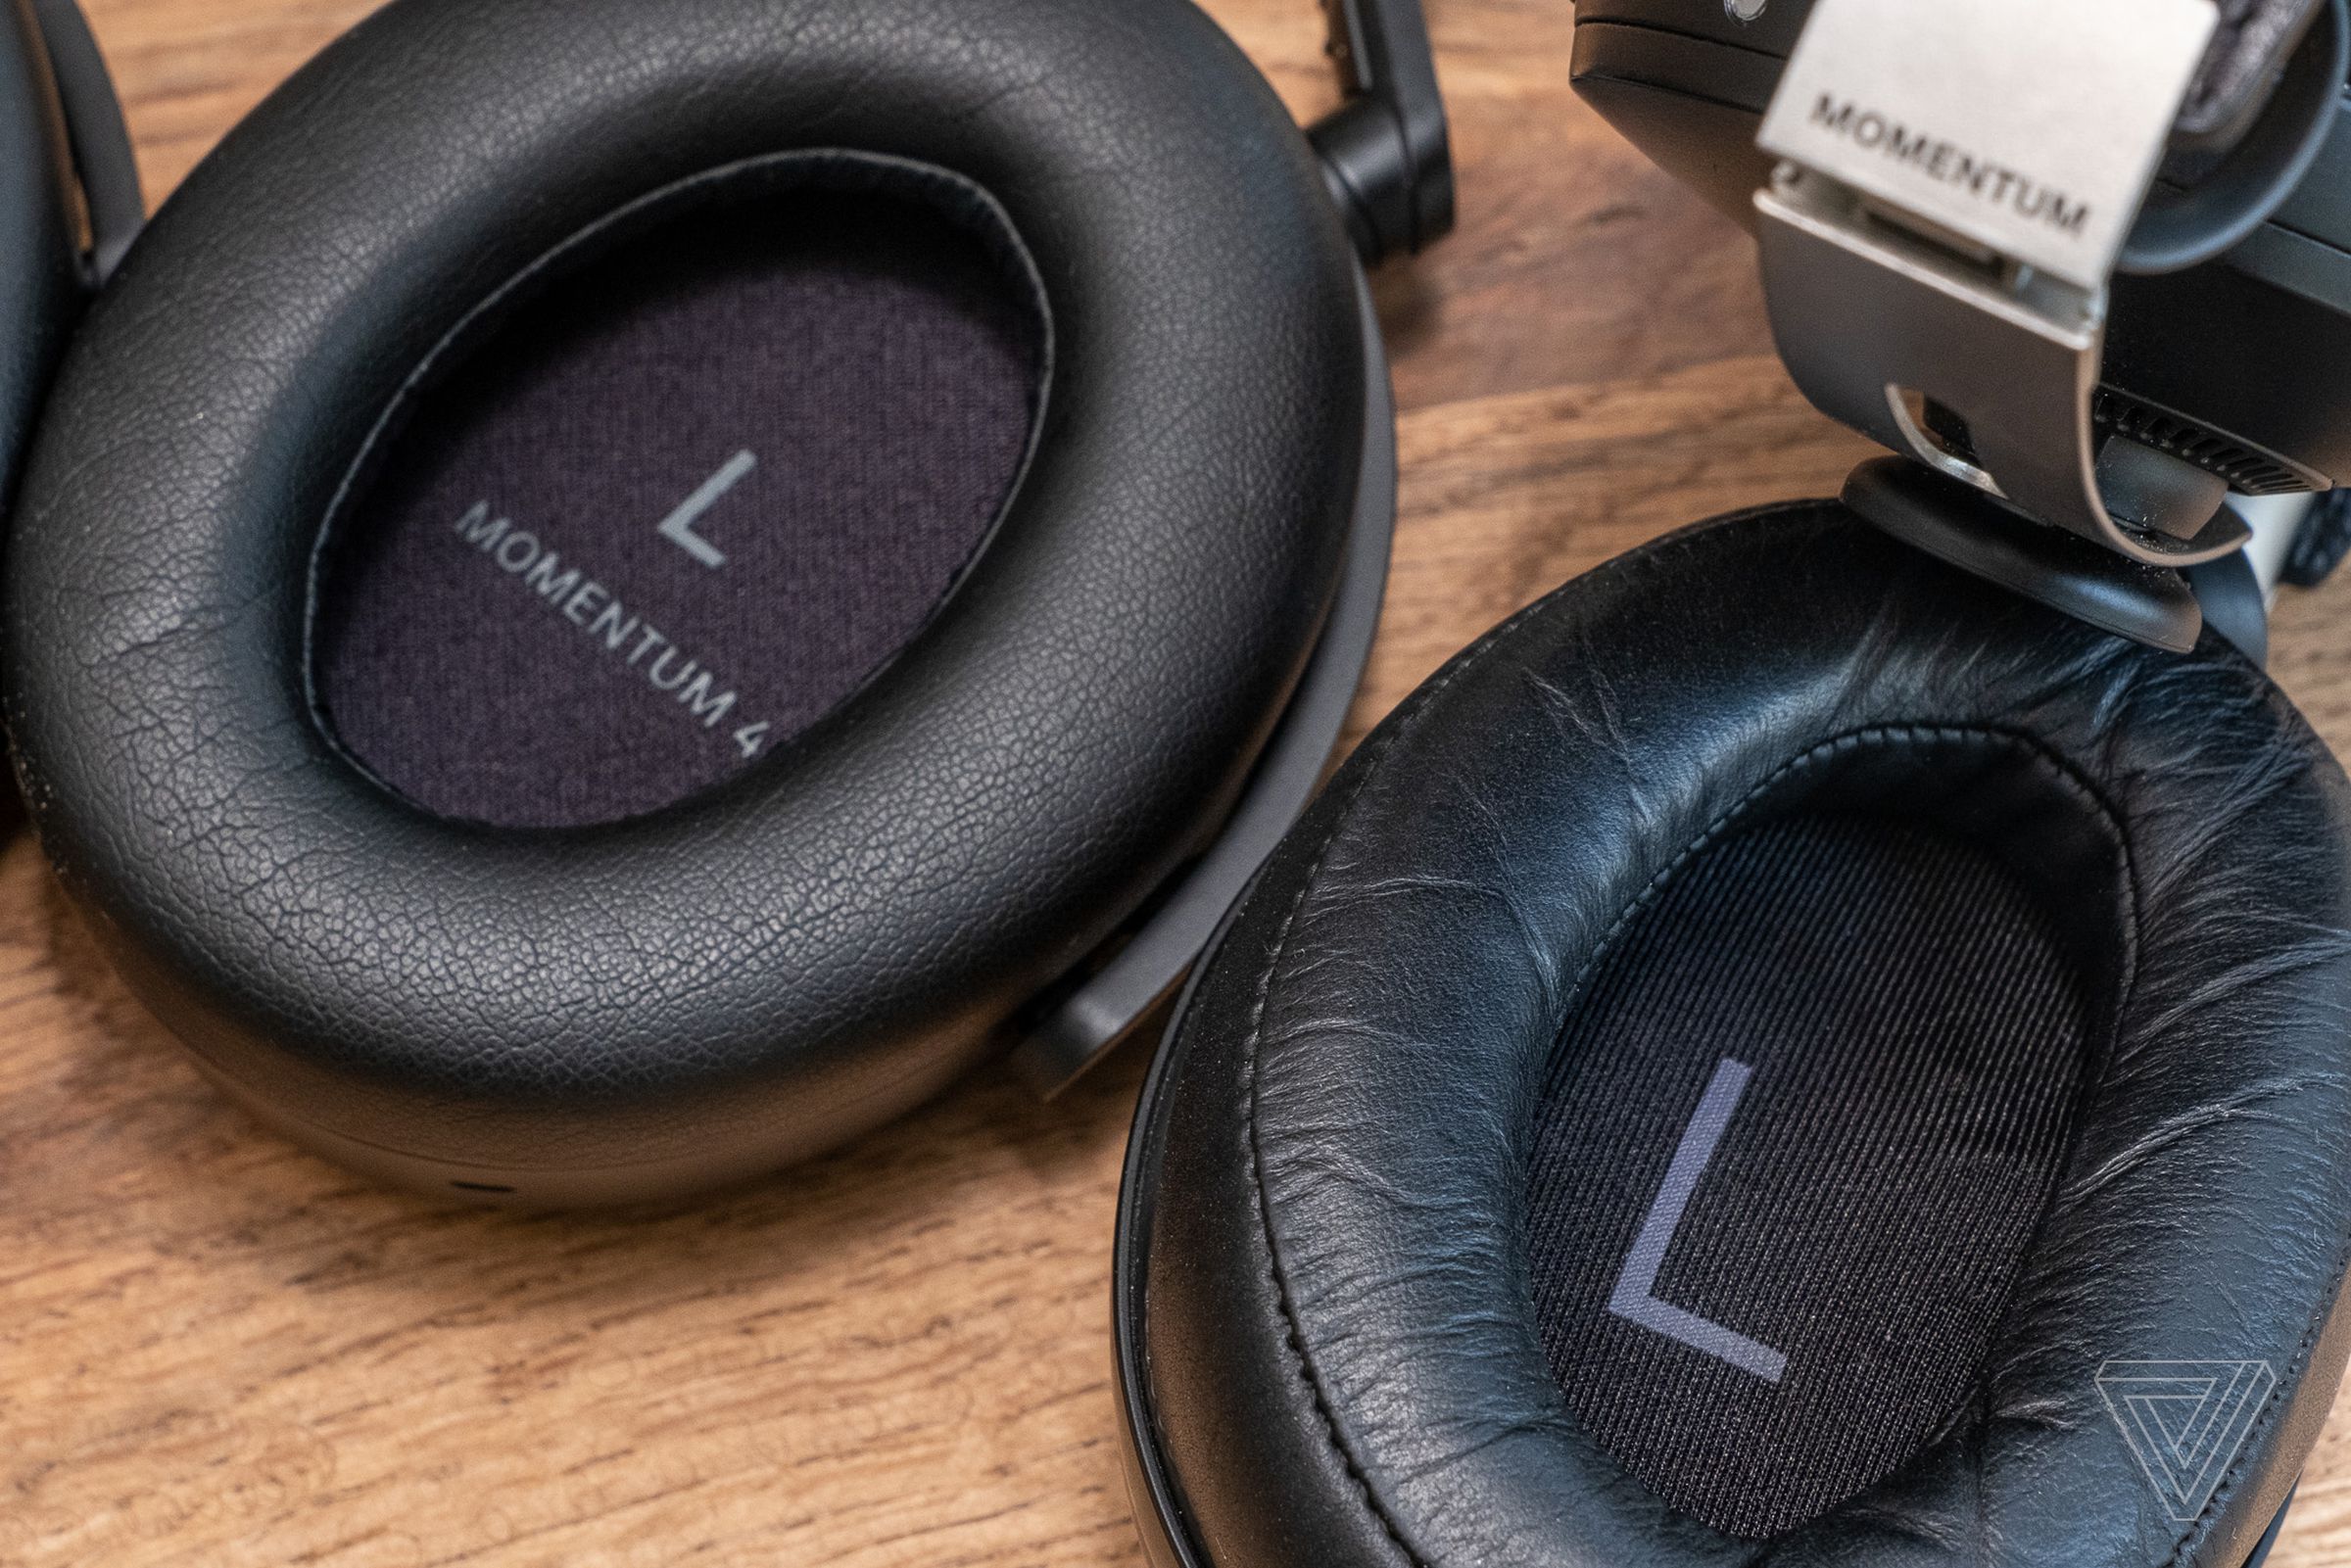 The deep-cushioned ear pads now use artificial PU leather.